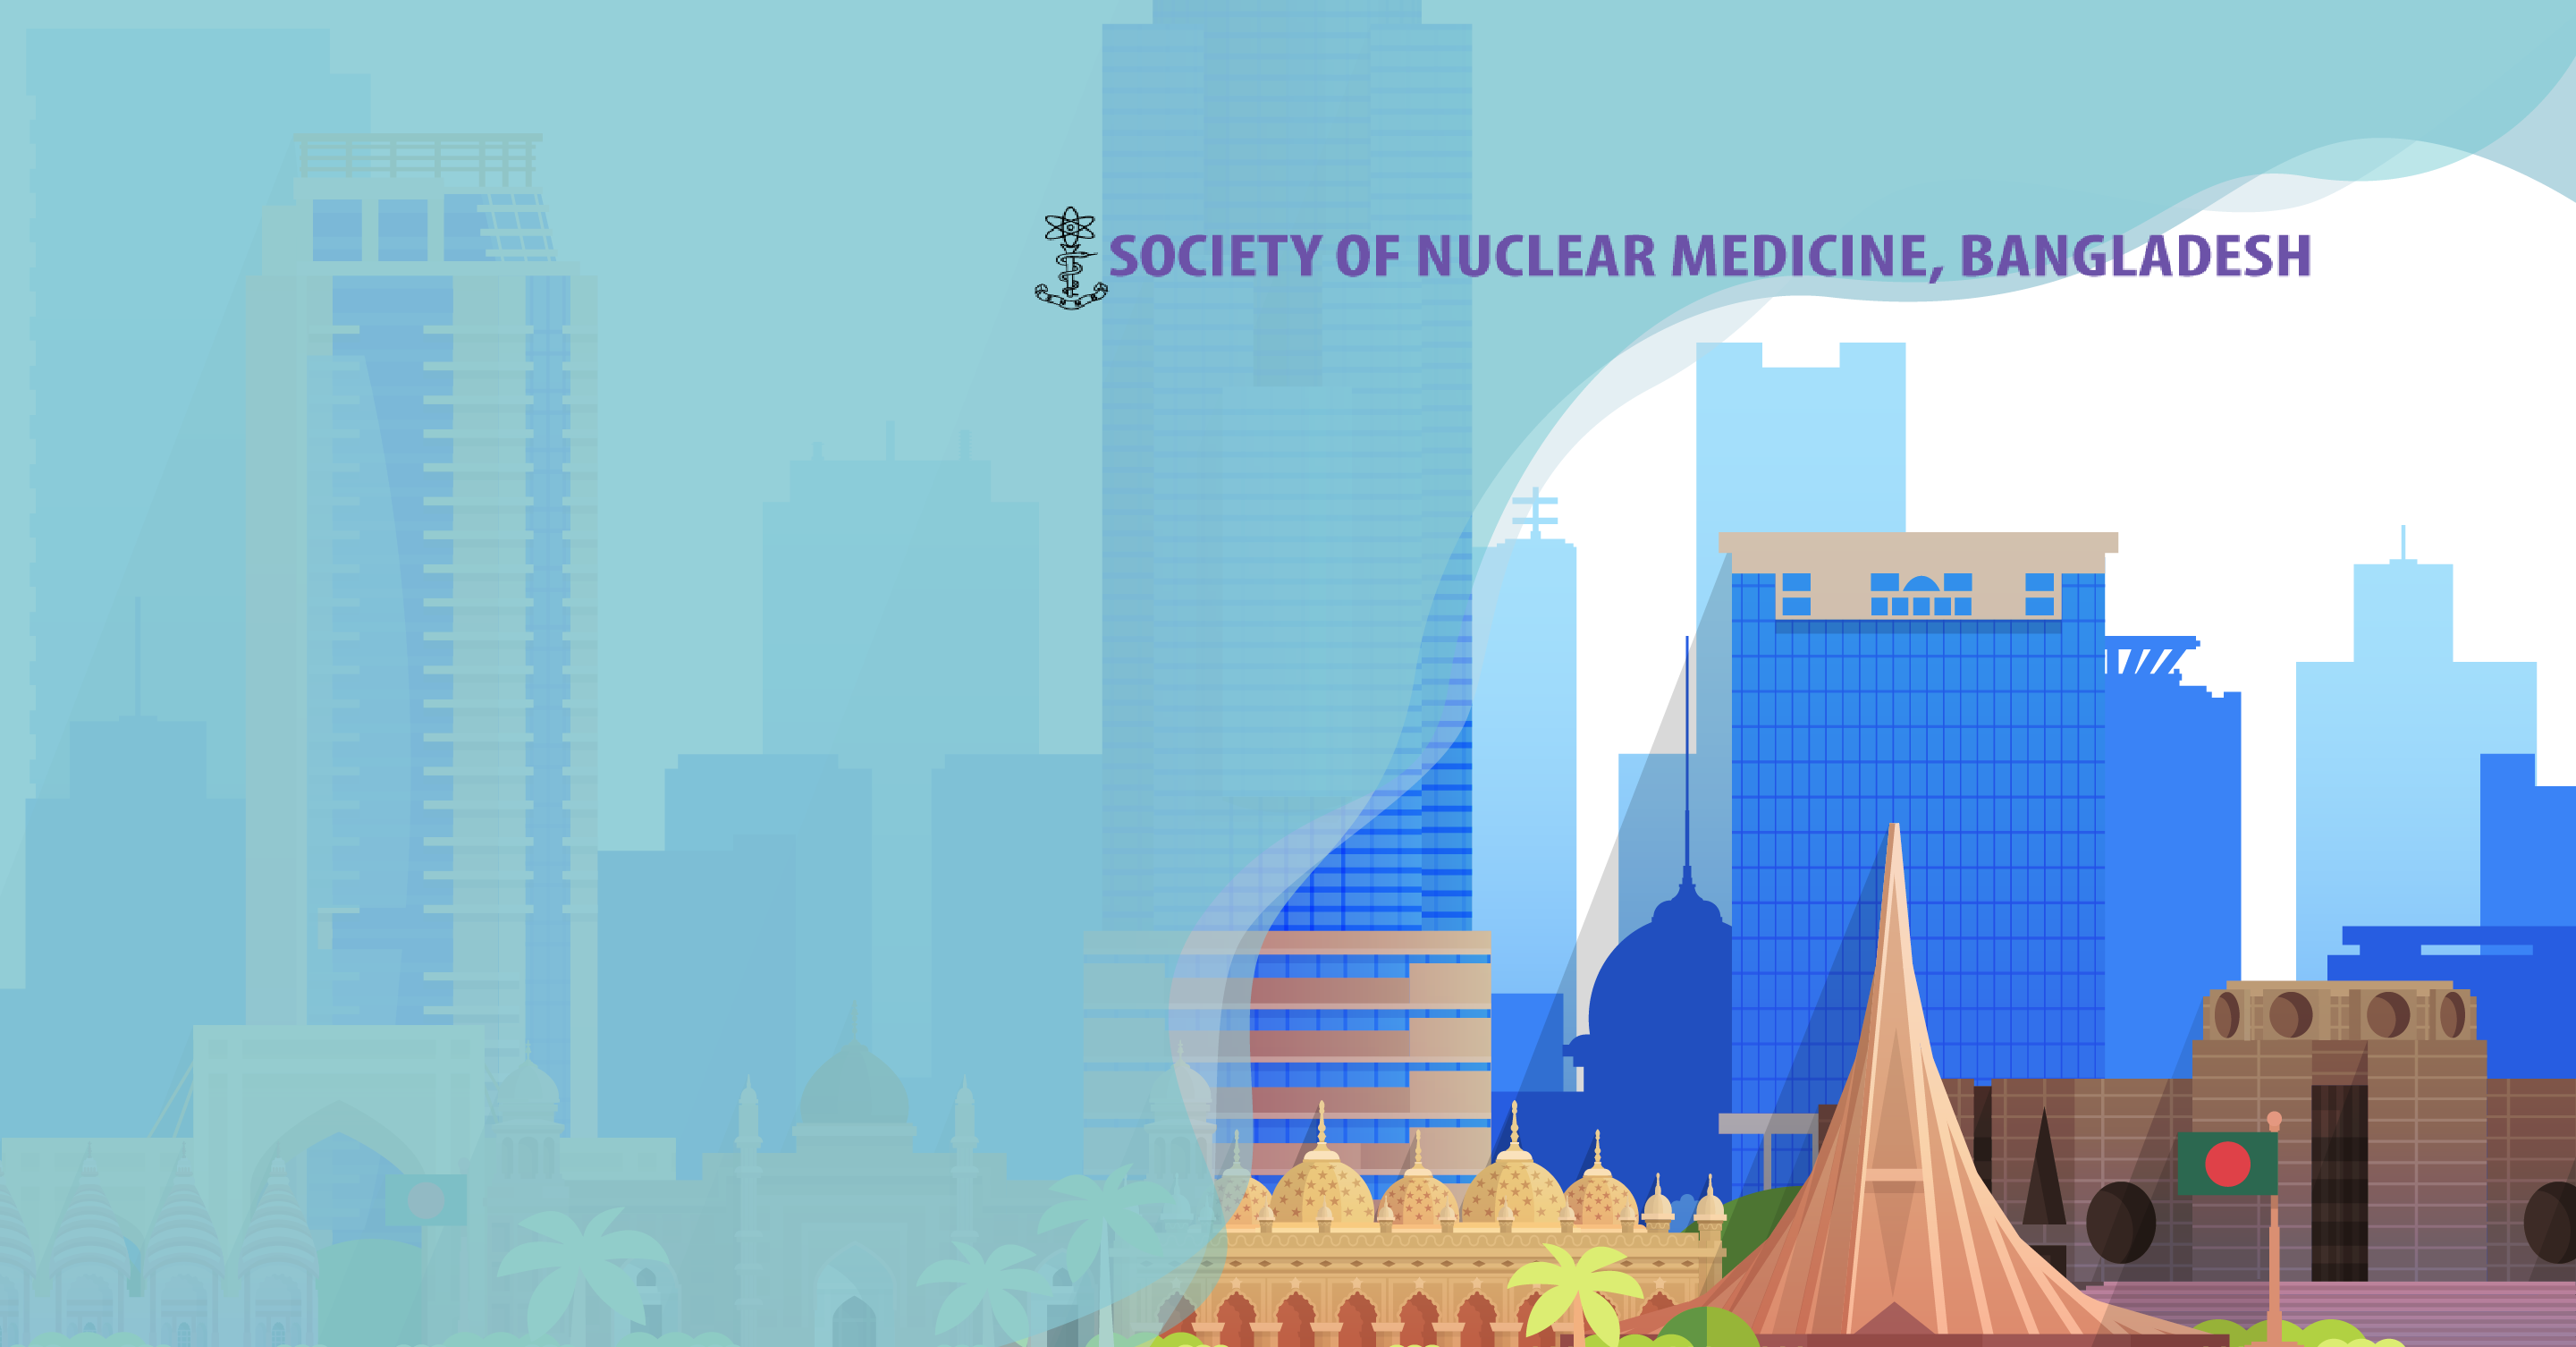 27th National Conference of the Society of Nuclear Medicine